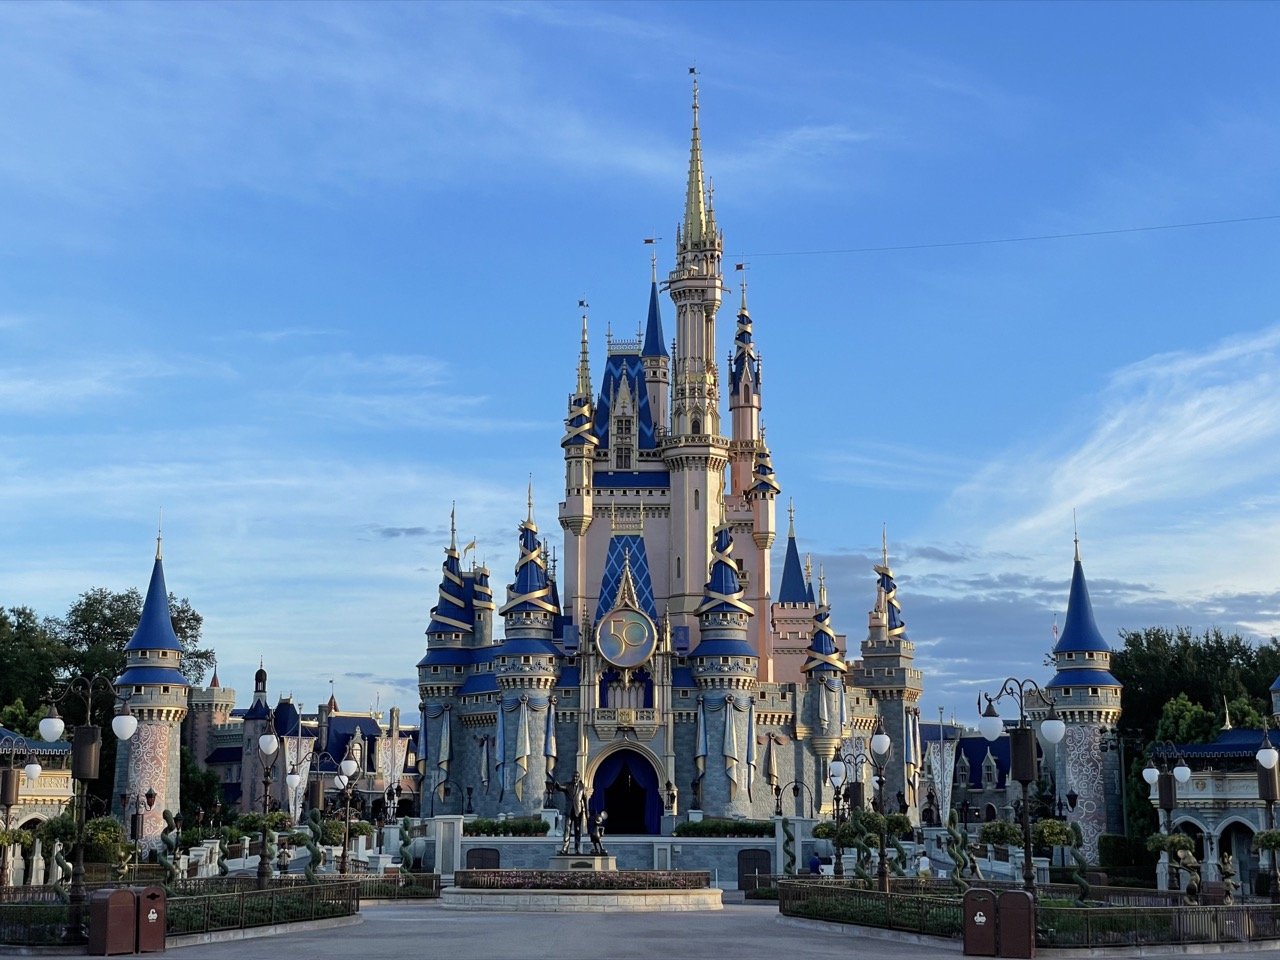 Magic Kingdom Schedule 2022 Magic Kingdom One Day Itinerary [2022] - Mouse Hacking